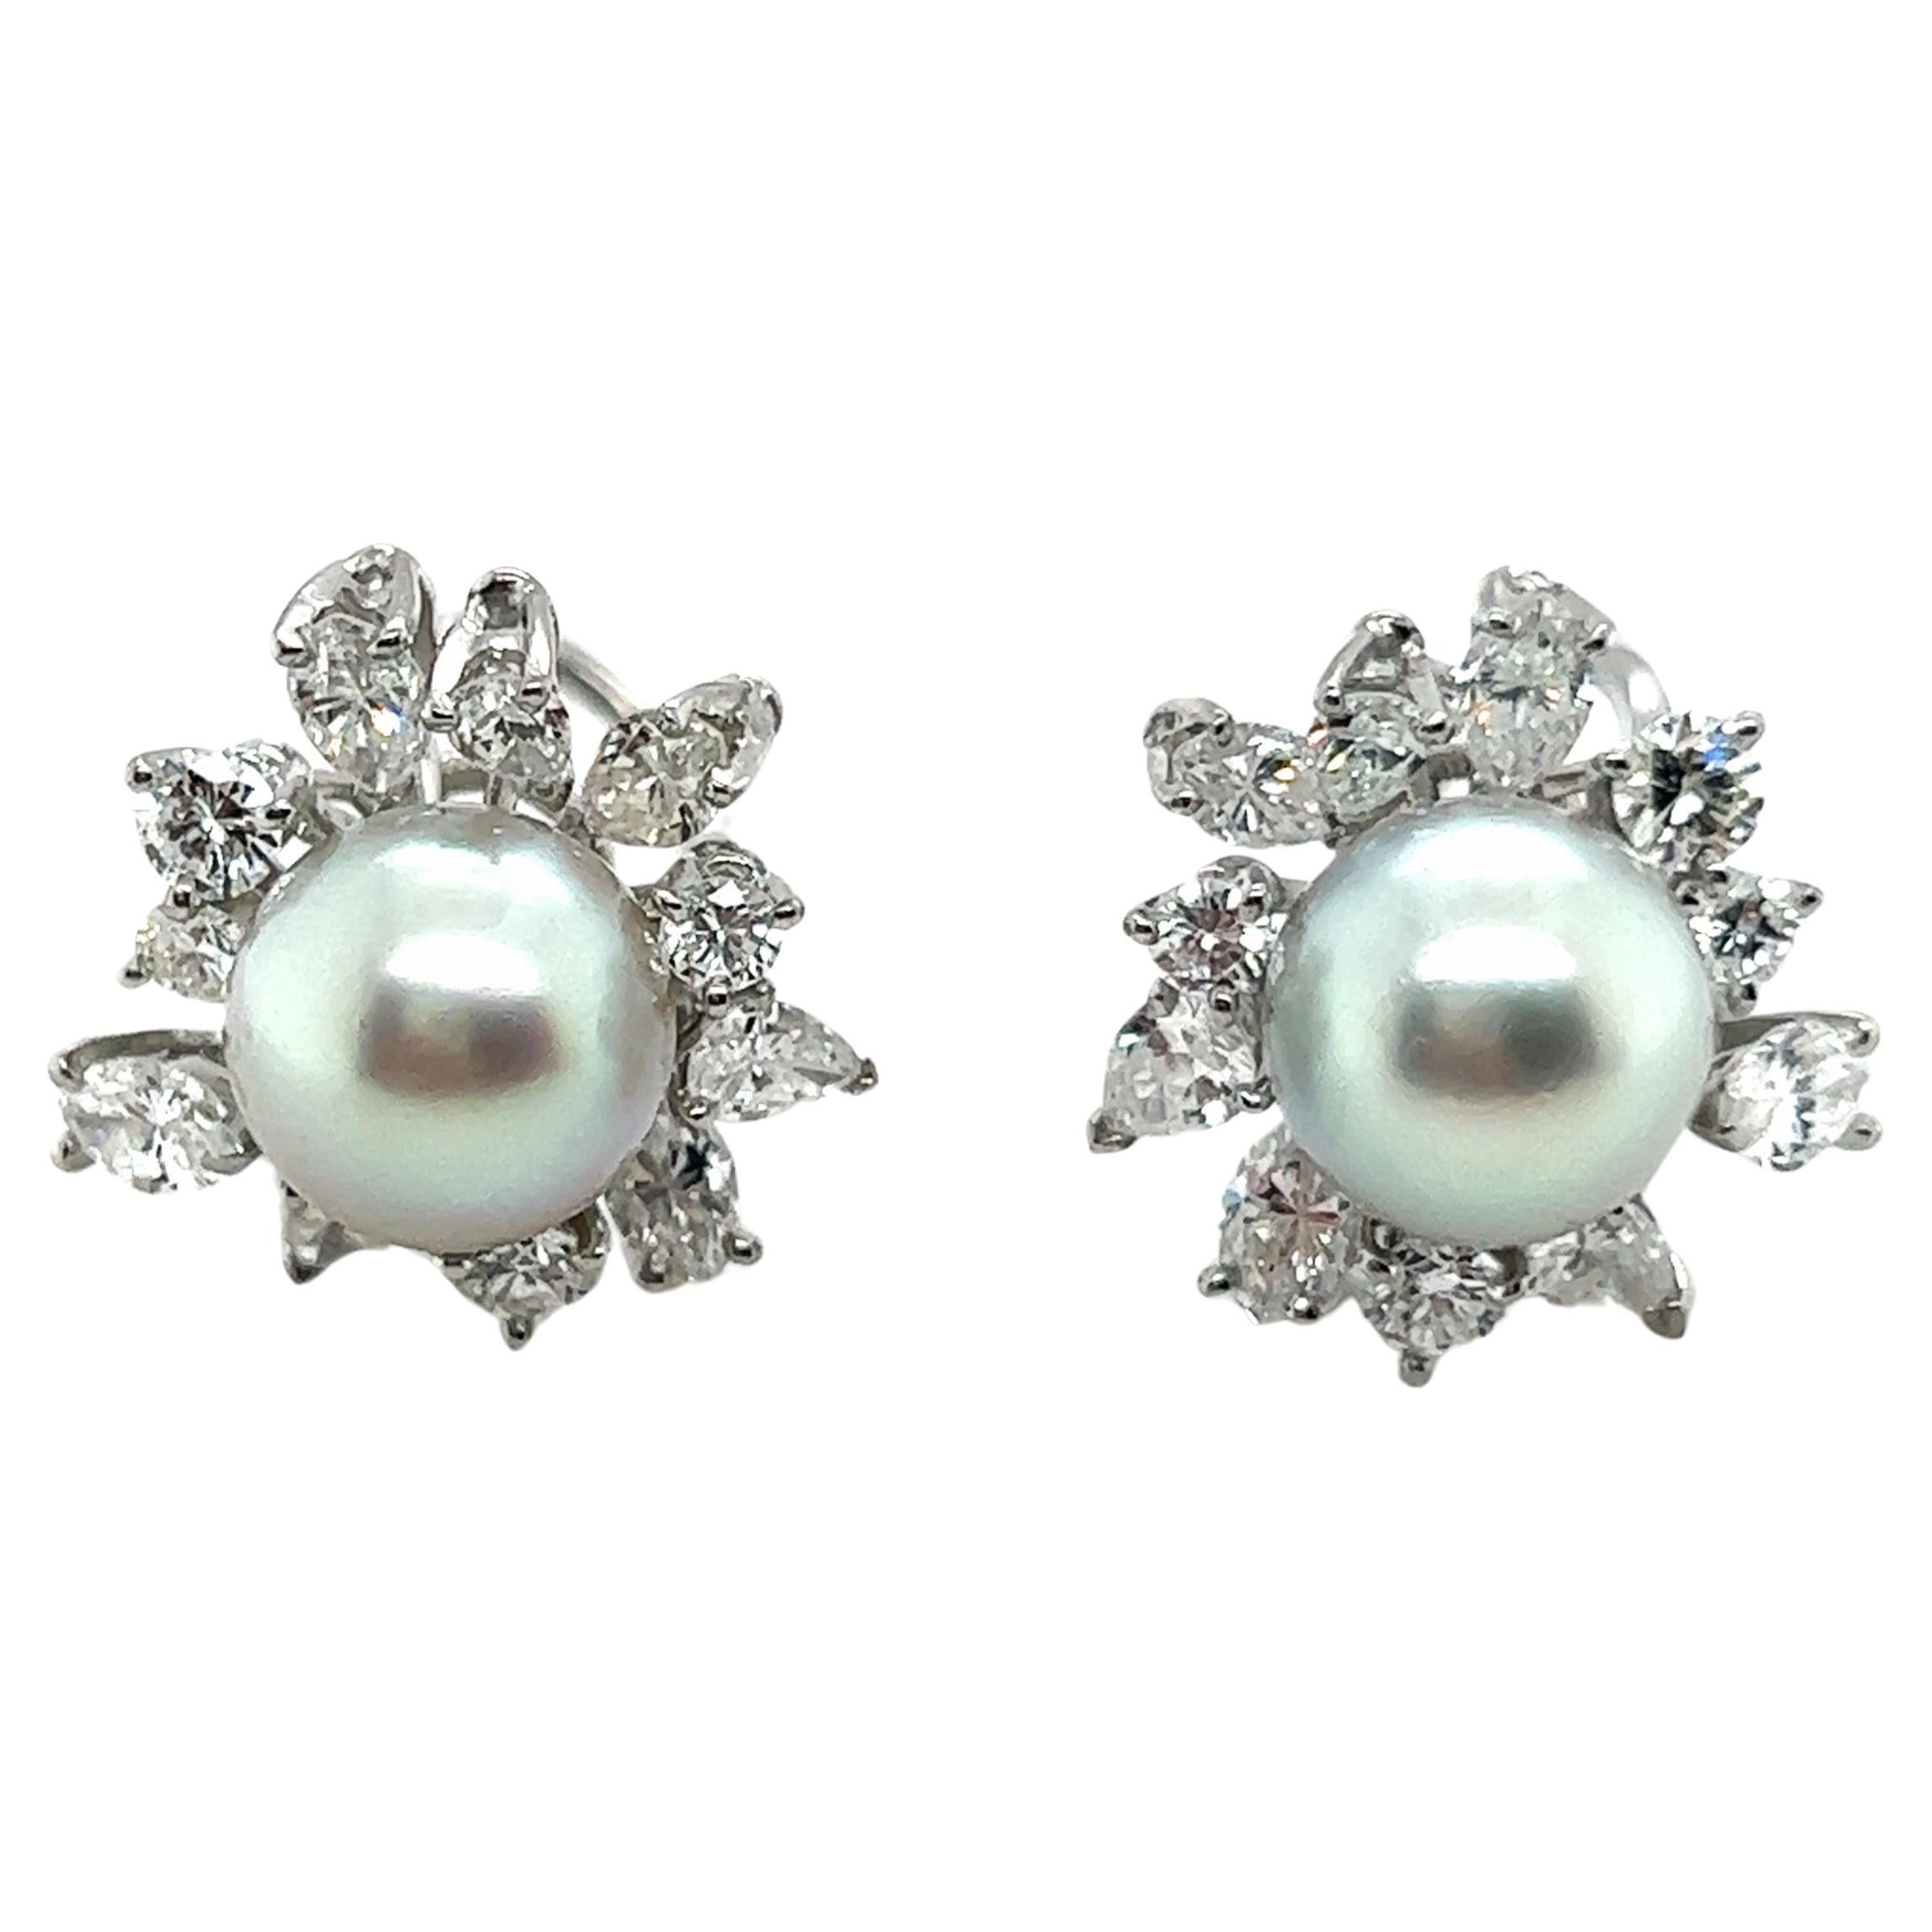 Clip-on Earrings with Pearls and Diamonds in 18 Karat White Gold by Meister 7